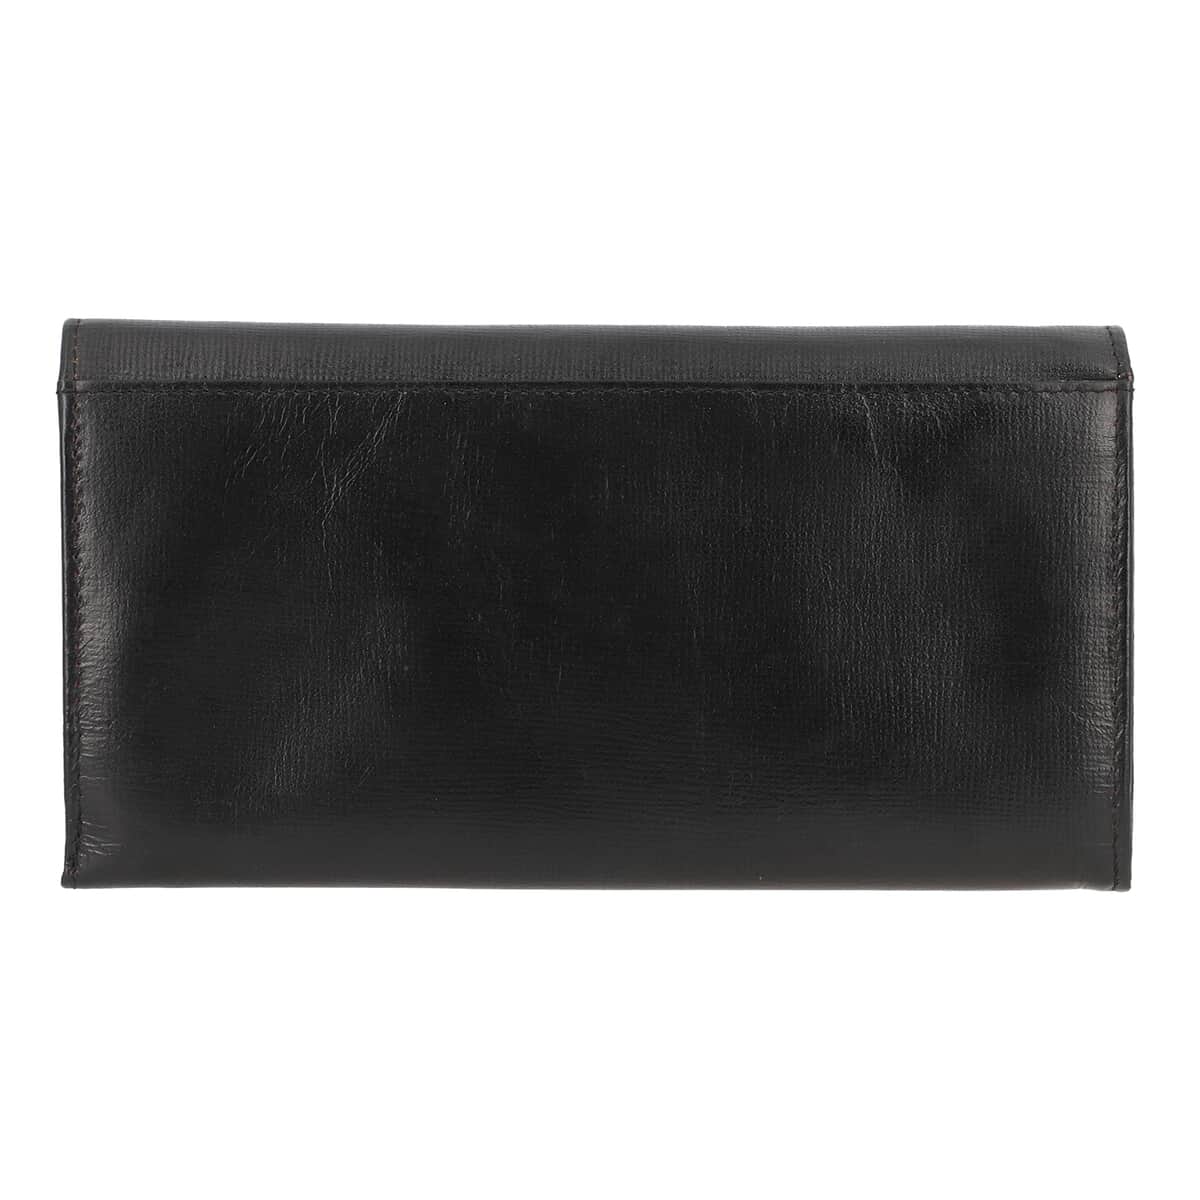 "UNION CODE -RFID Protected 100% Genuine Leather Women's Wallet SIZE: 7.5(L)x4.5(W) inches COLOR: Black " image number 6